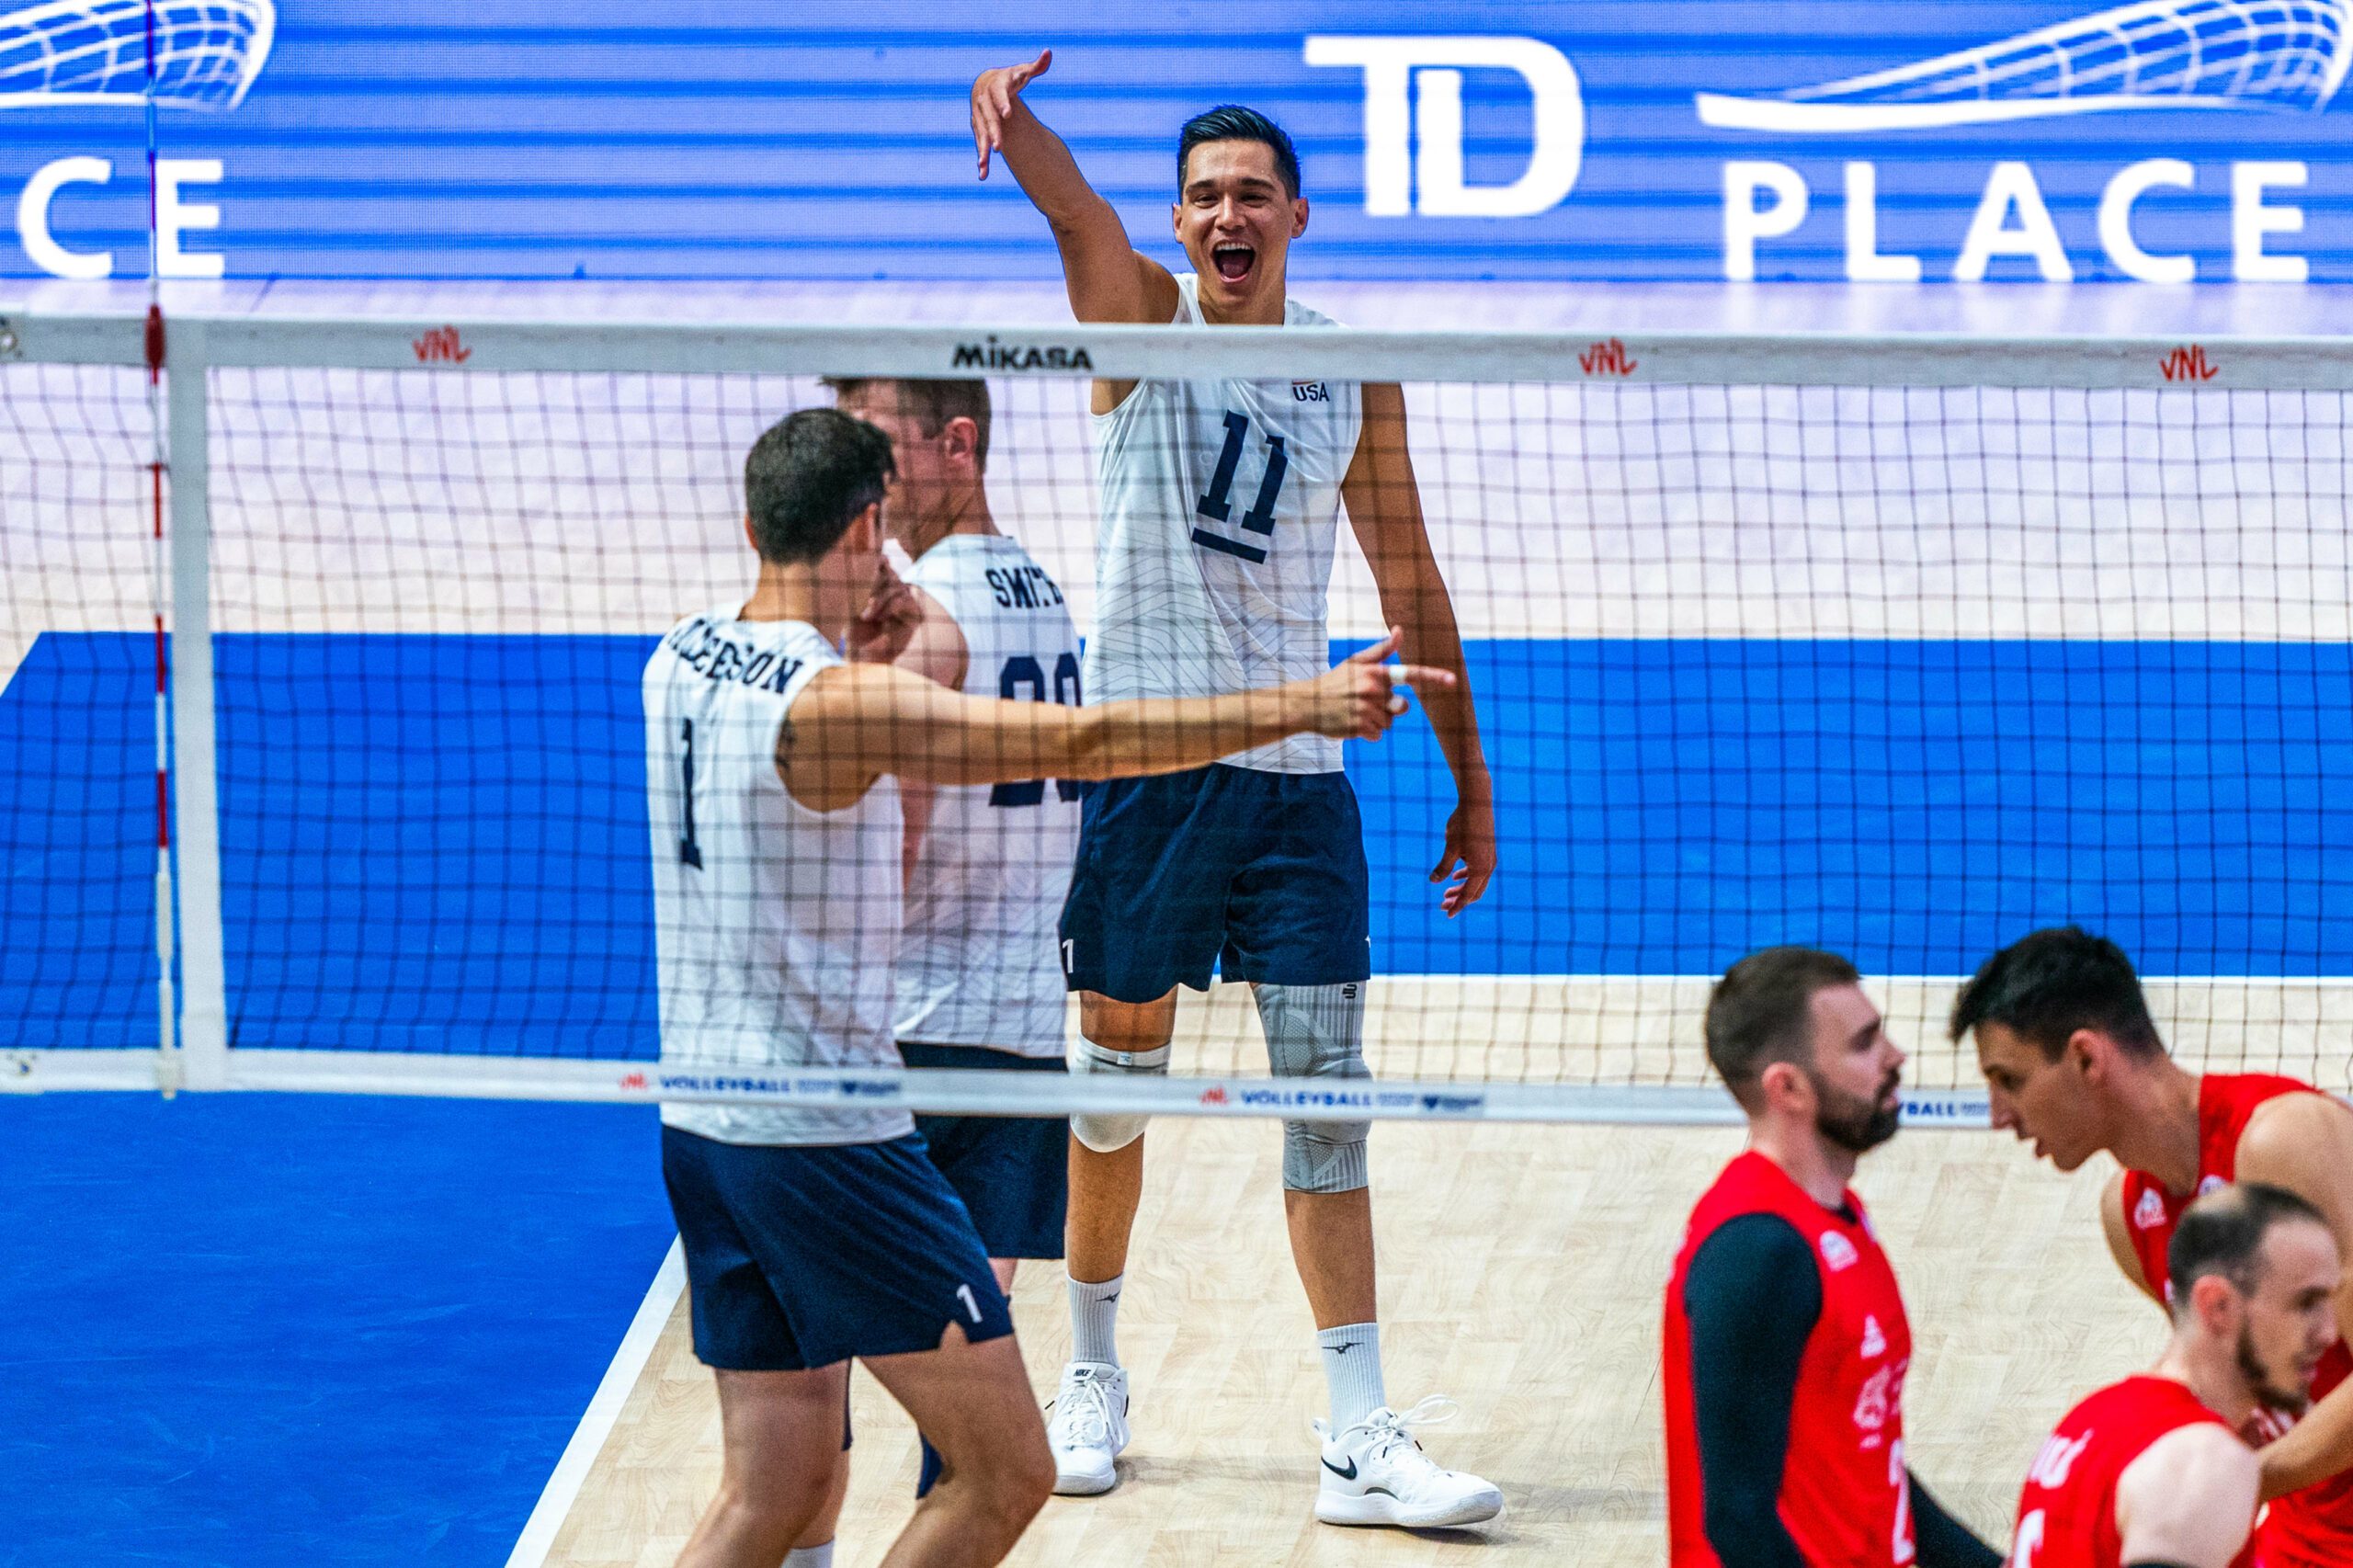 USA Dominate the Net in 3rd Win at 2024 VNL